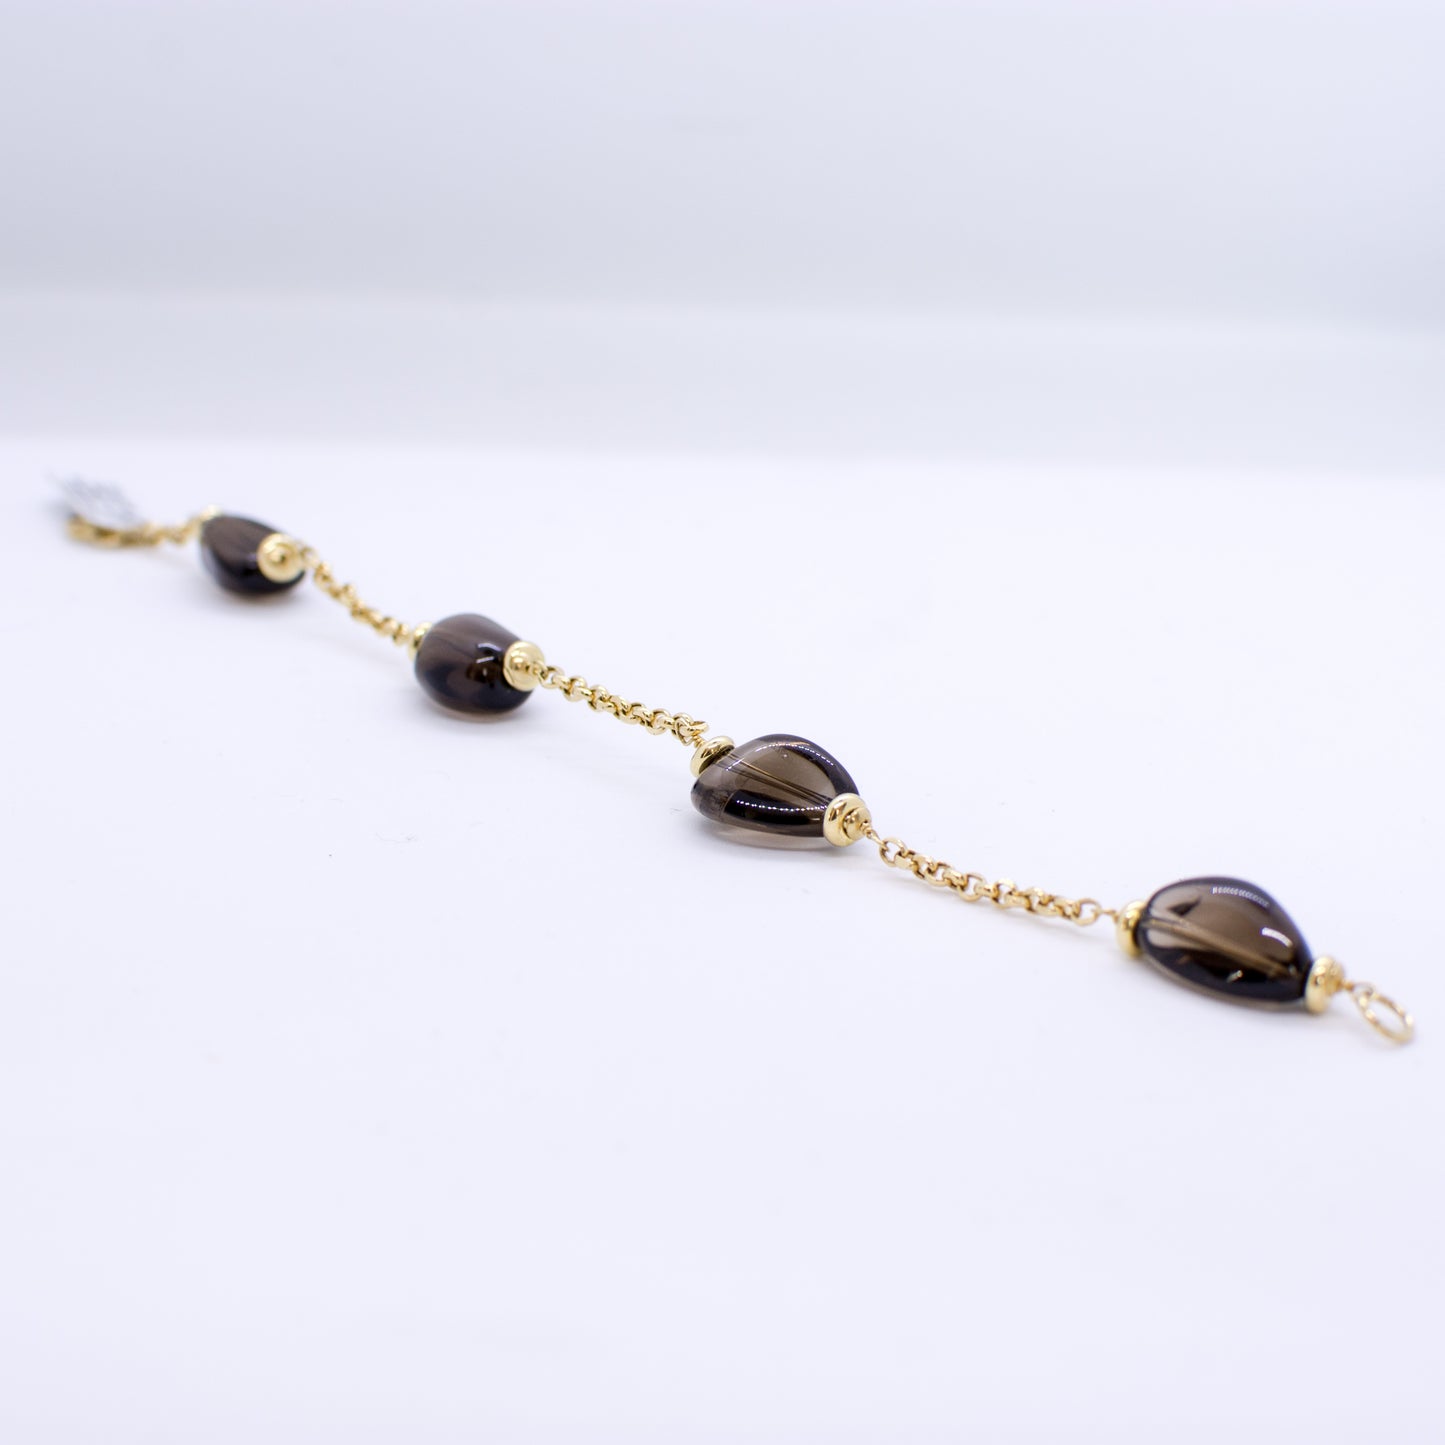 18ct Gold Smoky Quartz and Chain Bracelet Smoky Quartz dimensions: 10mm x 12mm approximately Diamond cut 2mm gauge solid trace chain 19cm long 18ct yellow gold This item can be ordered in a variety of lengths.  Please contact us for custom requirements.